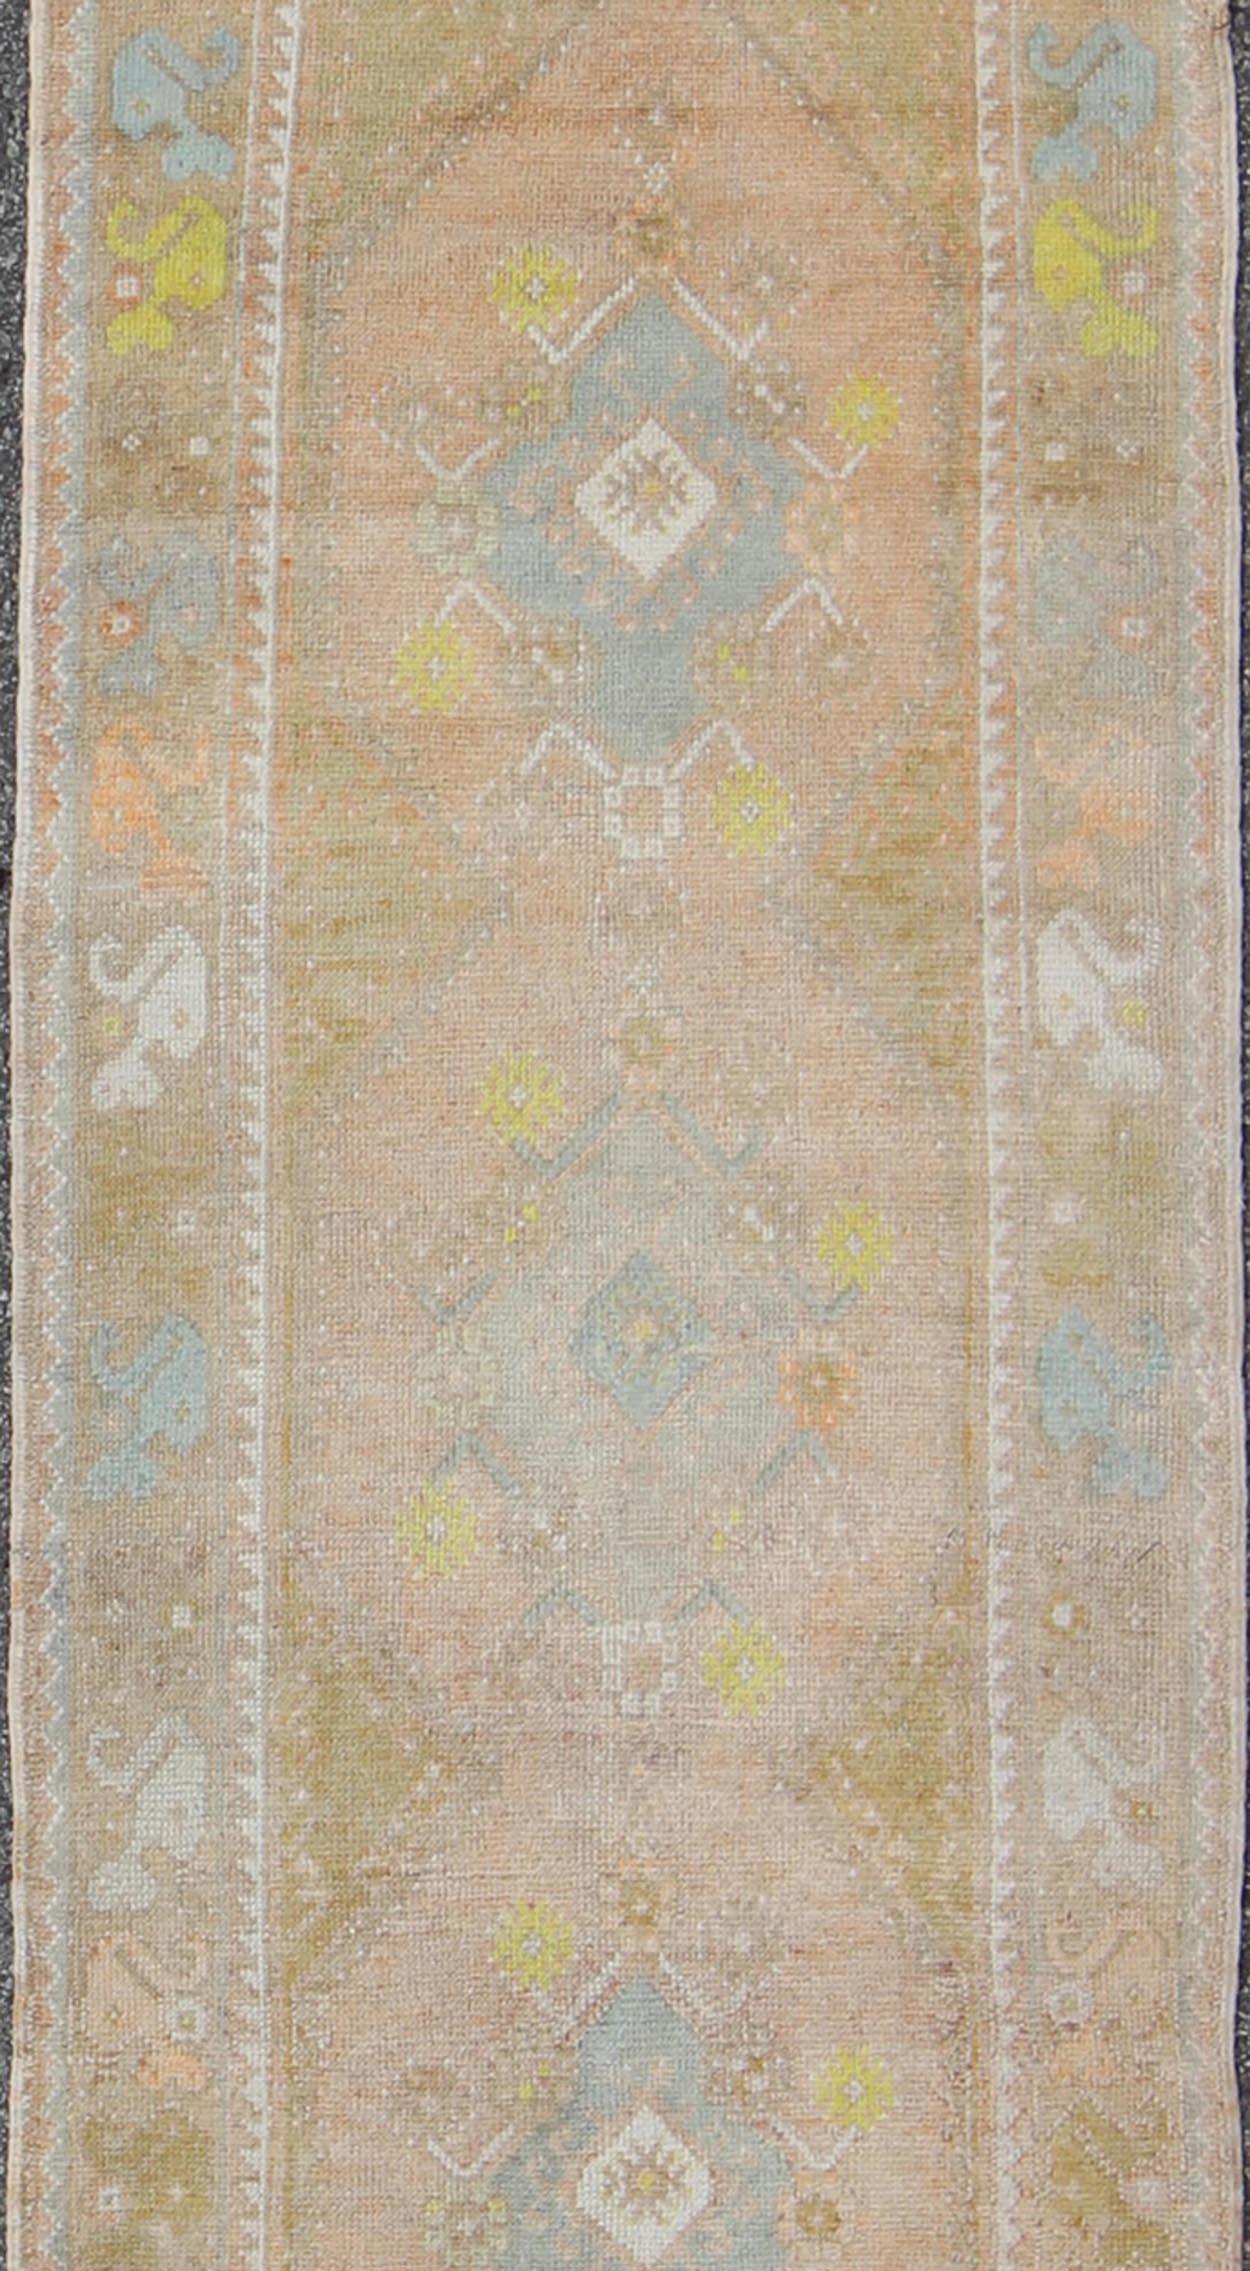 Watercolor Turkish Oushak Runner, rug EN-165867, country of origin / type: Turkey / Oushak, circa 1940

This vintage Turkish Oushak runner features four layered medallions expanding across the central field. The surrounding border features a